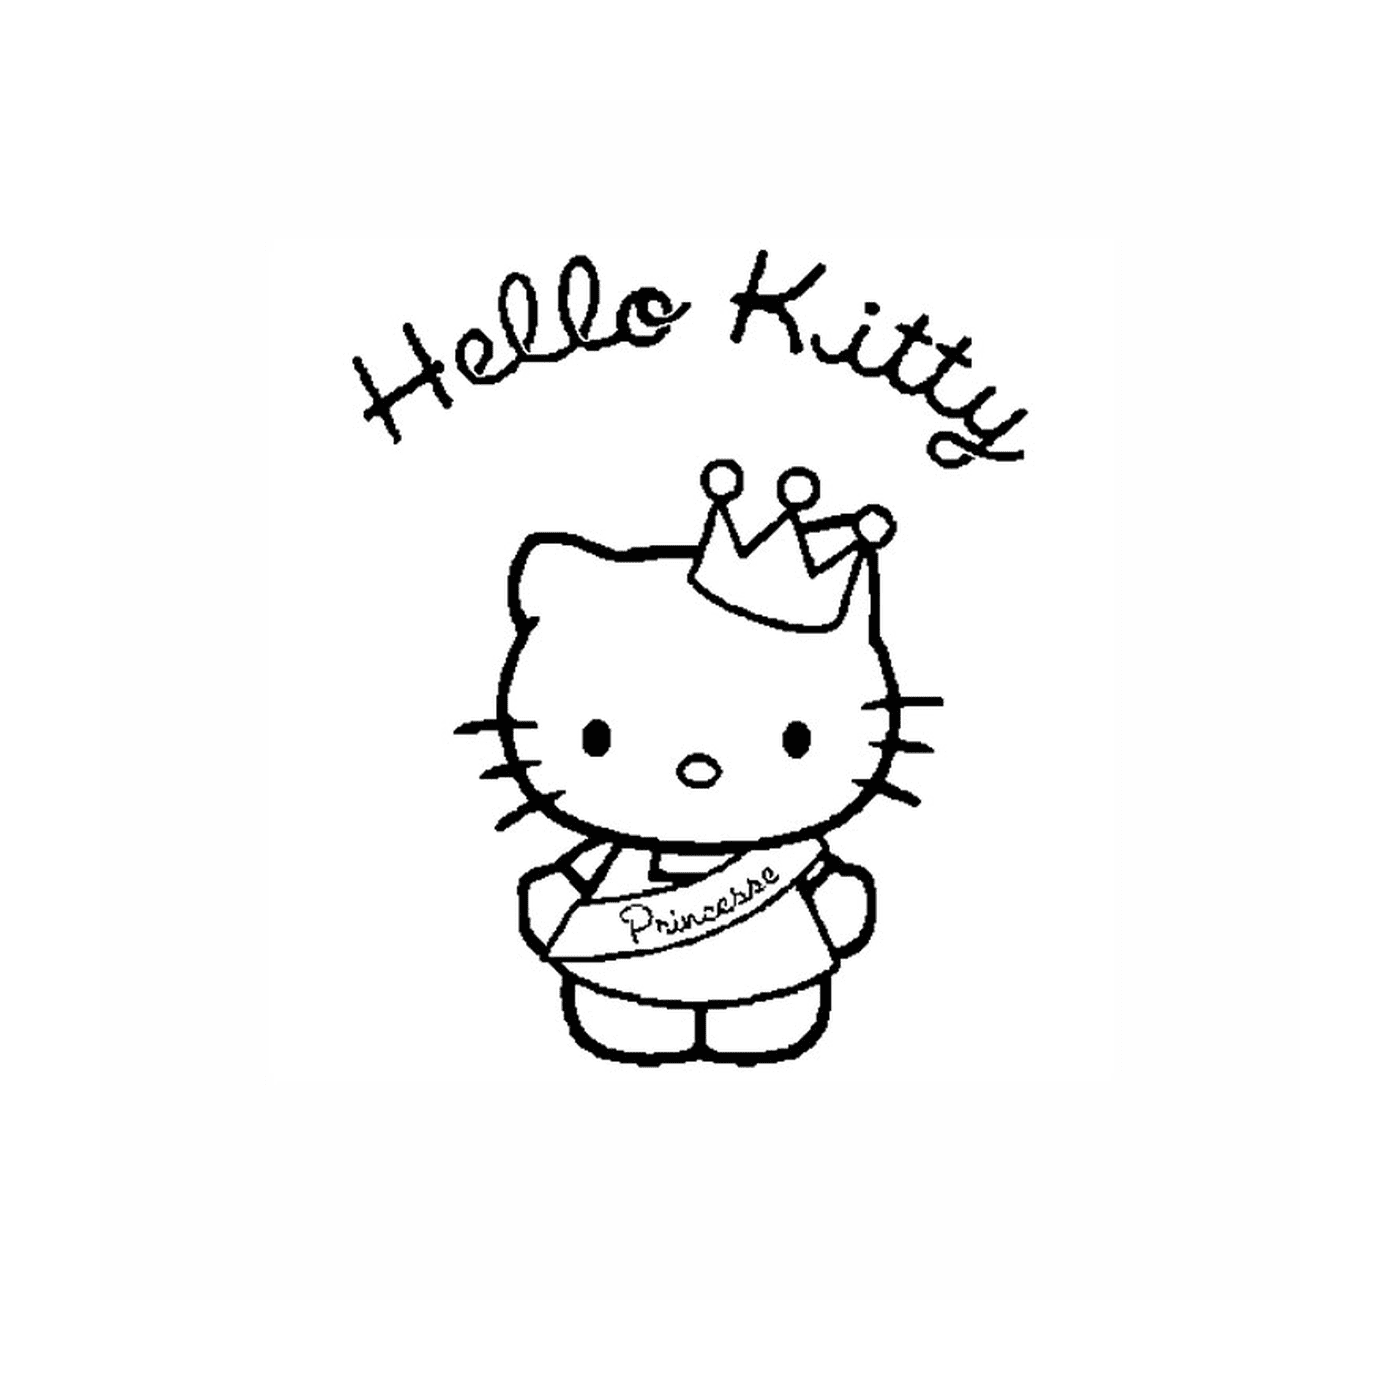  Hello Kitty with a crown 